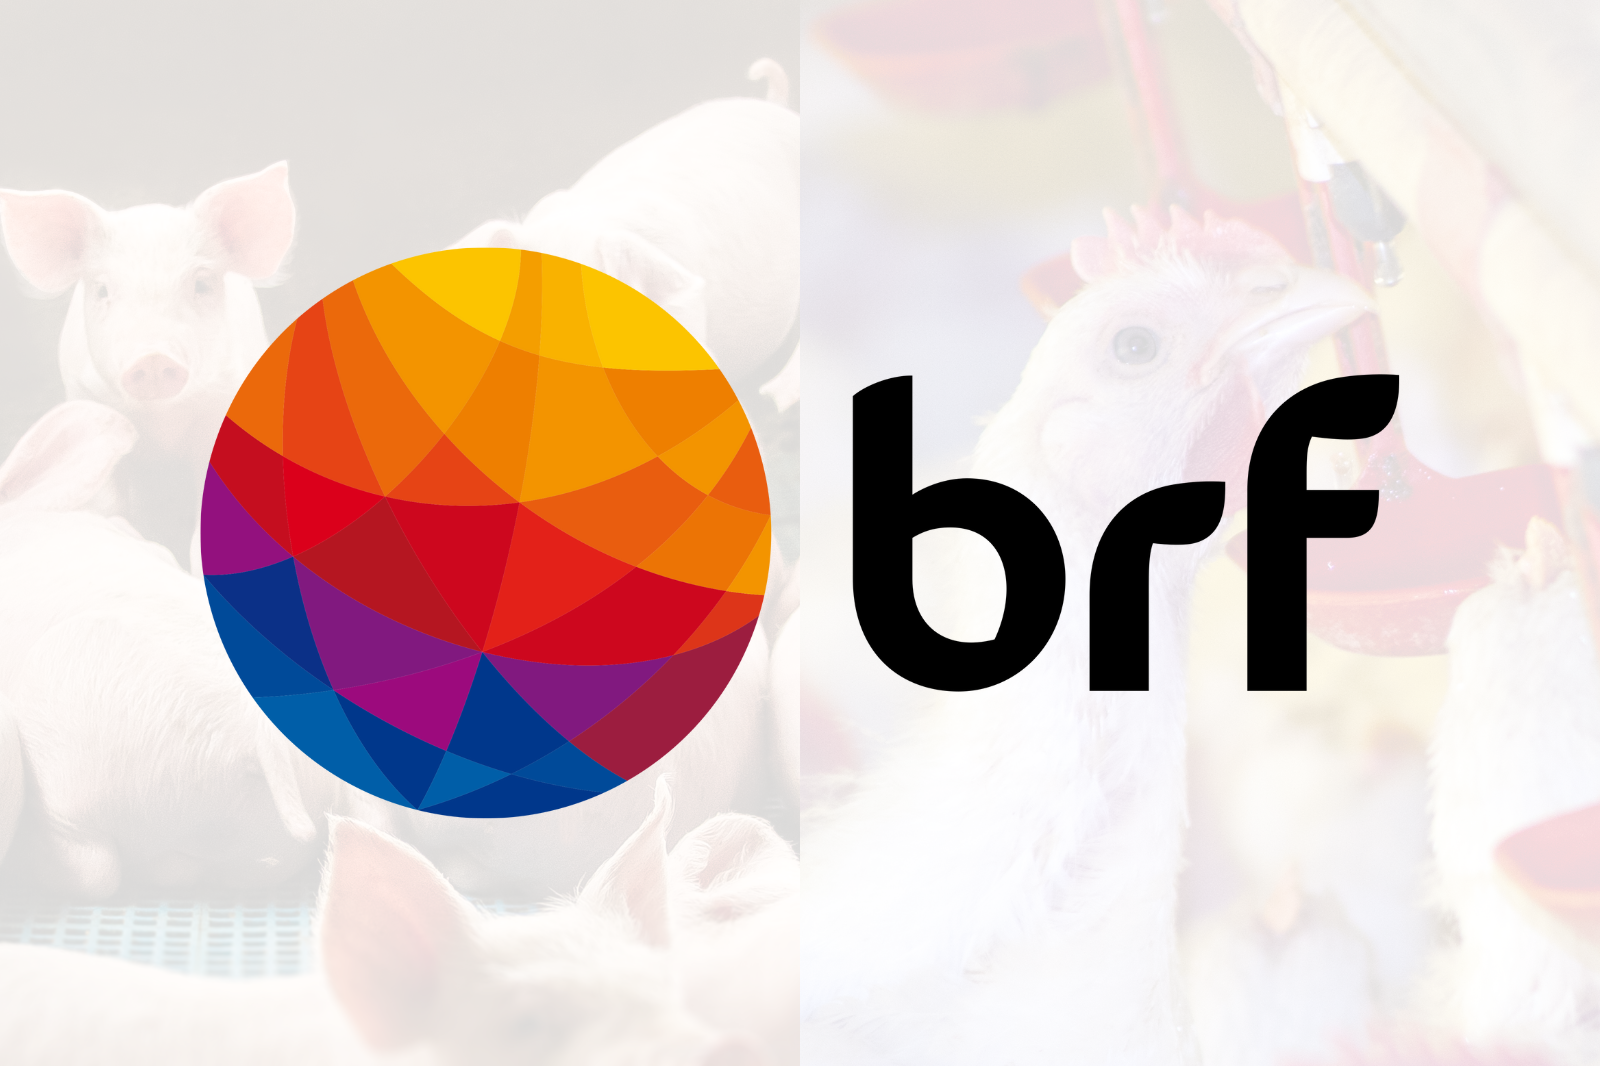 BRF certifies 100% of its slaughter units in animal welfare in Brazil